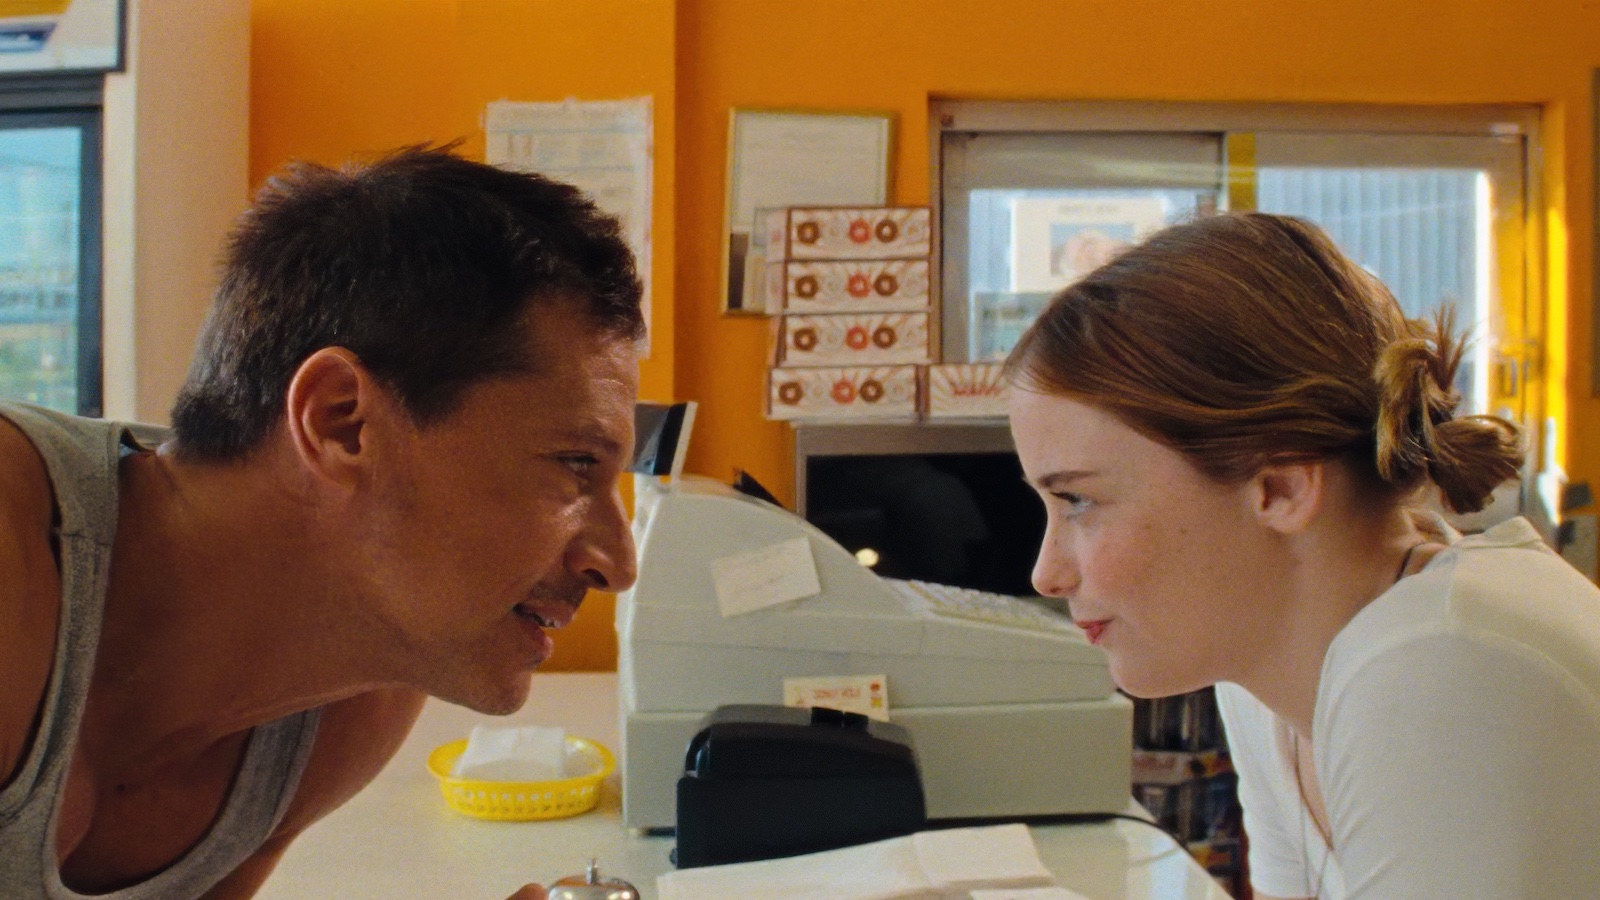 An older man and a younger woman look at each other across the counter at a donut shop, their faces in close profile.